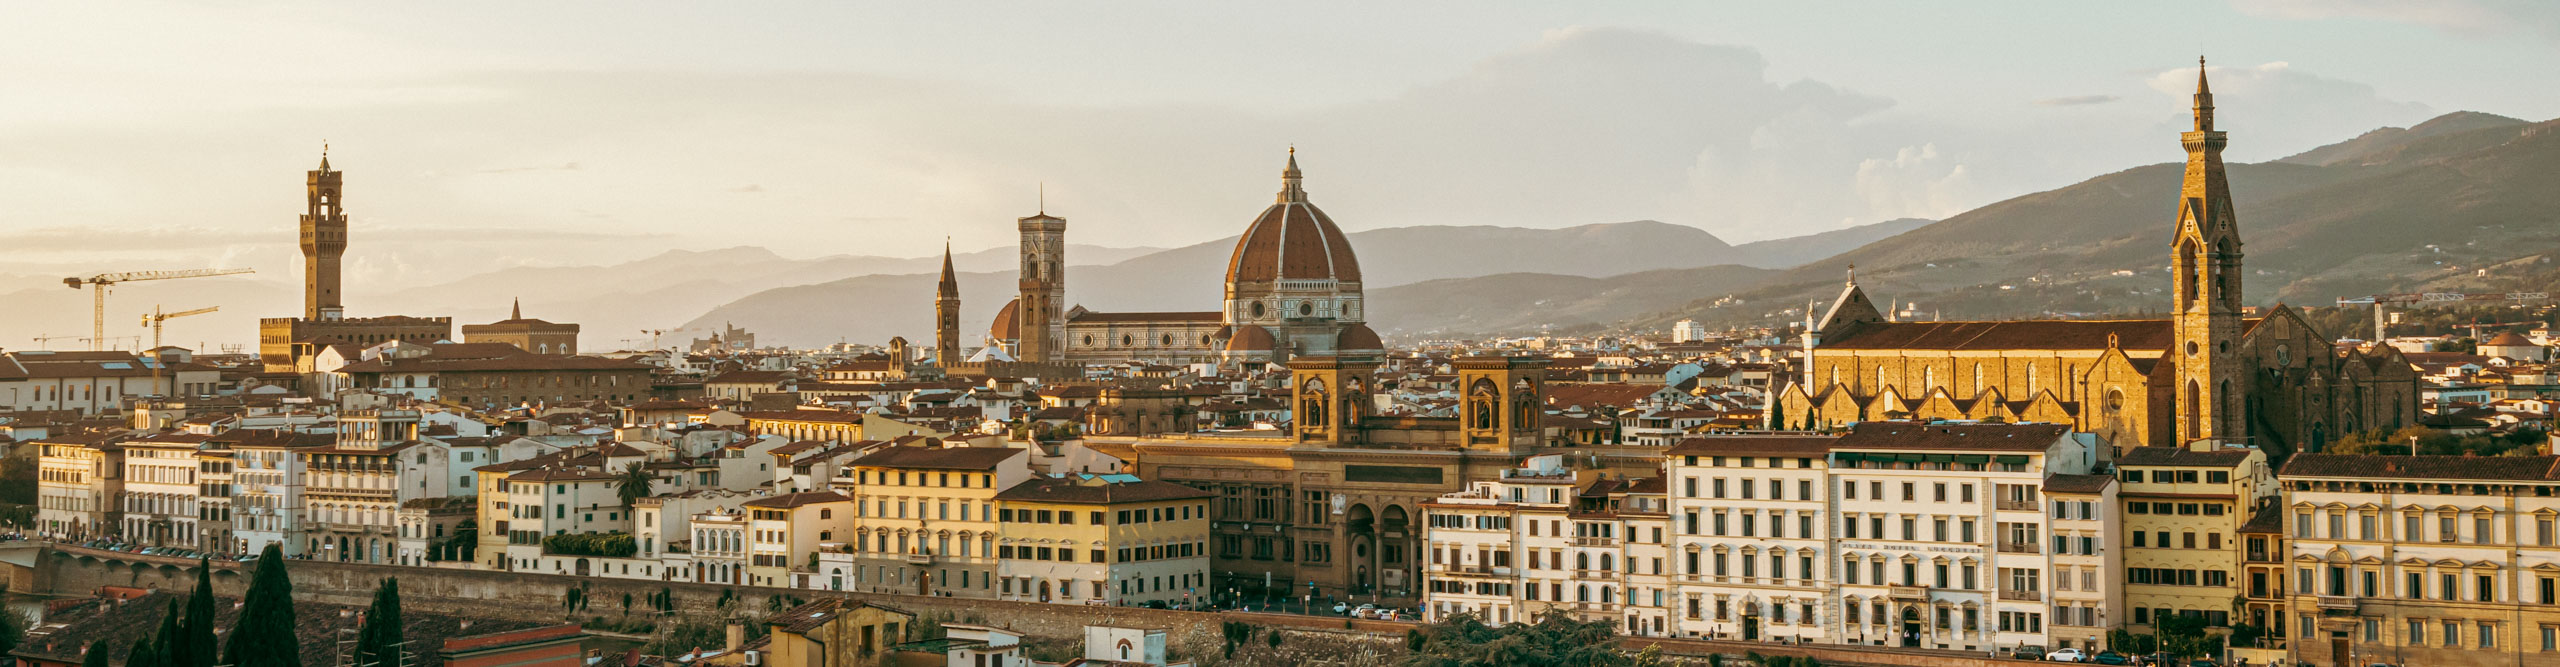 View of the city and rooftops at sunset, in Florence, Italy 